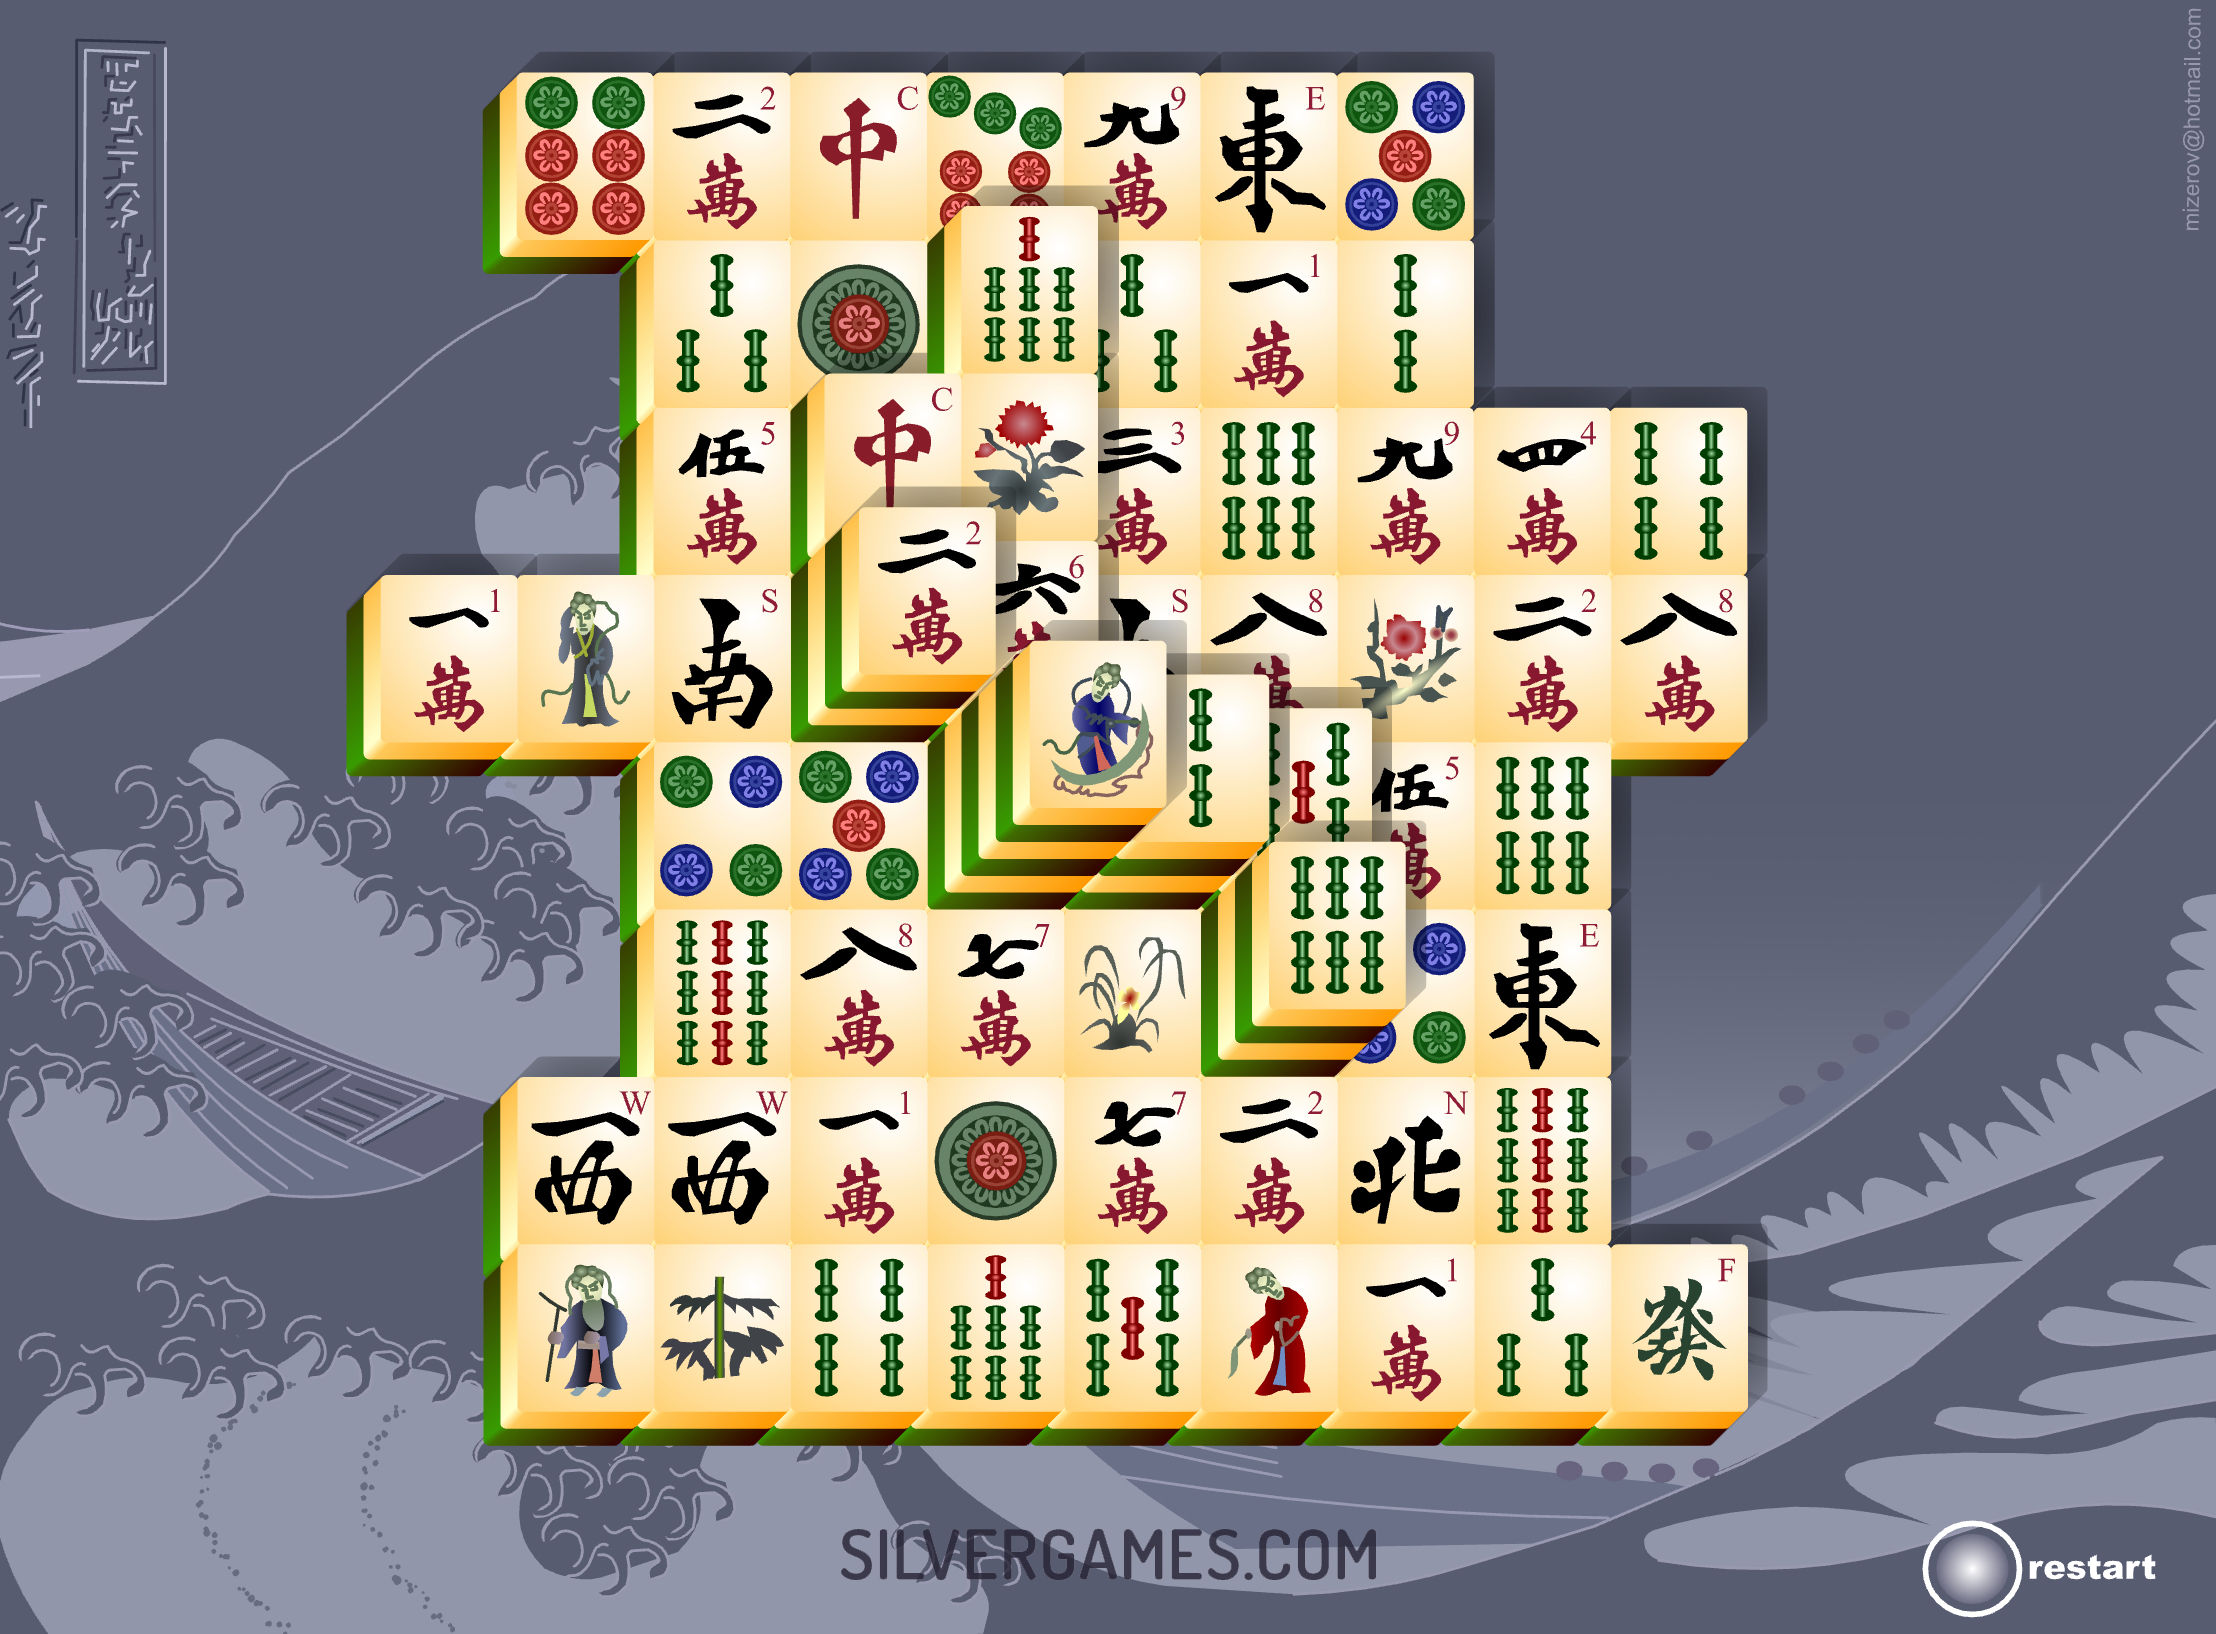 Mahjong Titans - Online Game - Play for Free